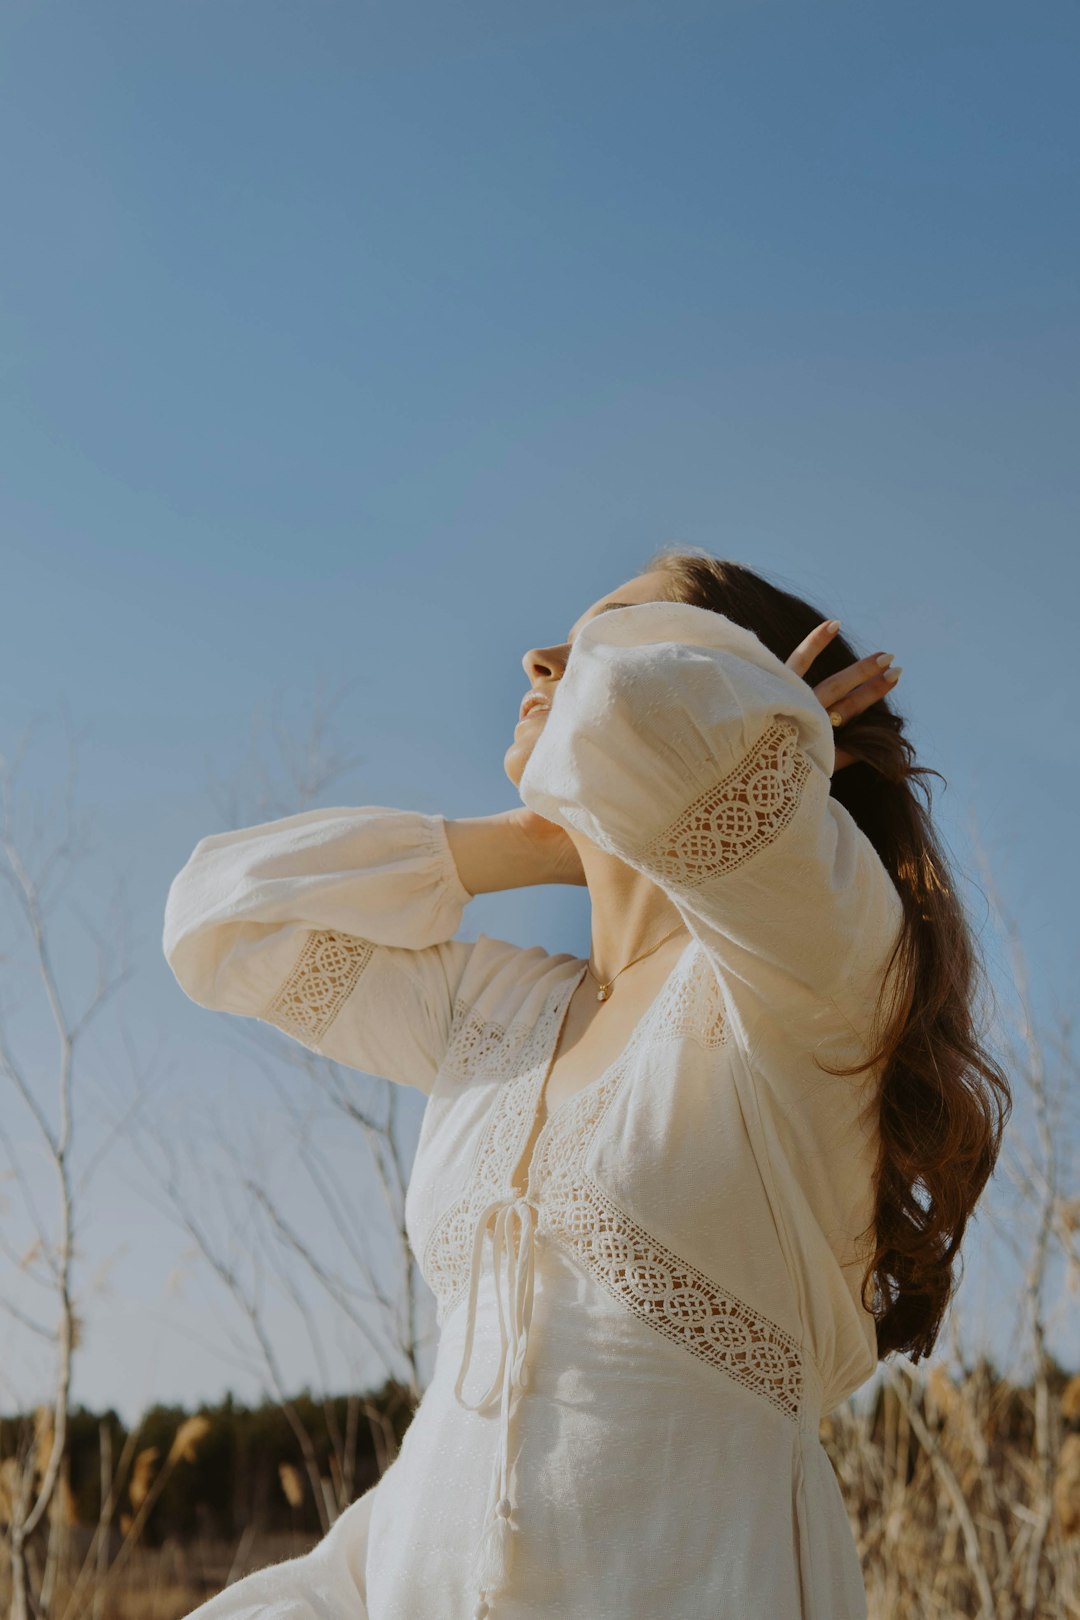 woman in white long sleeve shirt covering her face with white scarf